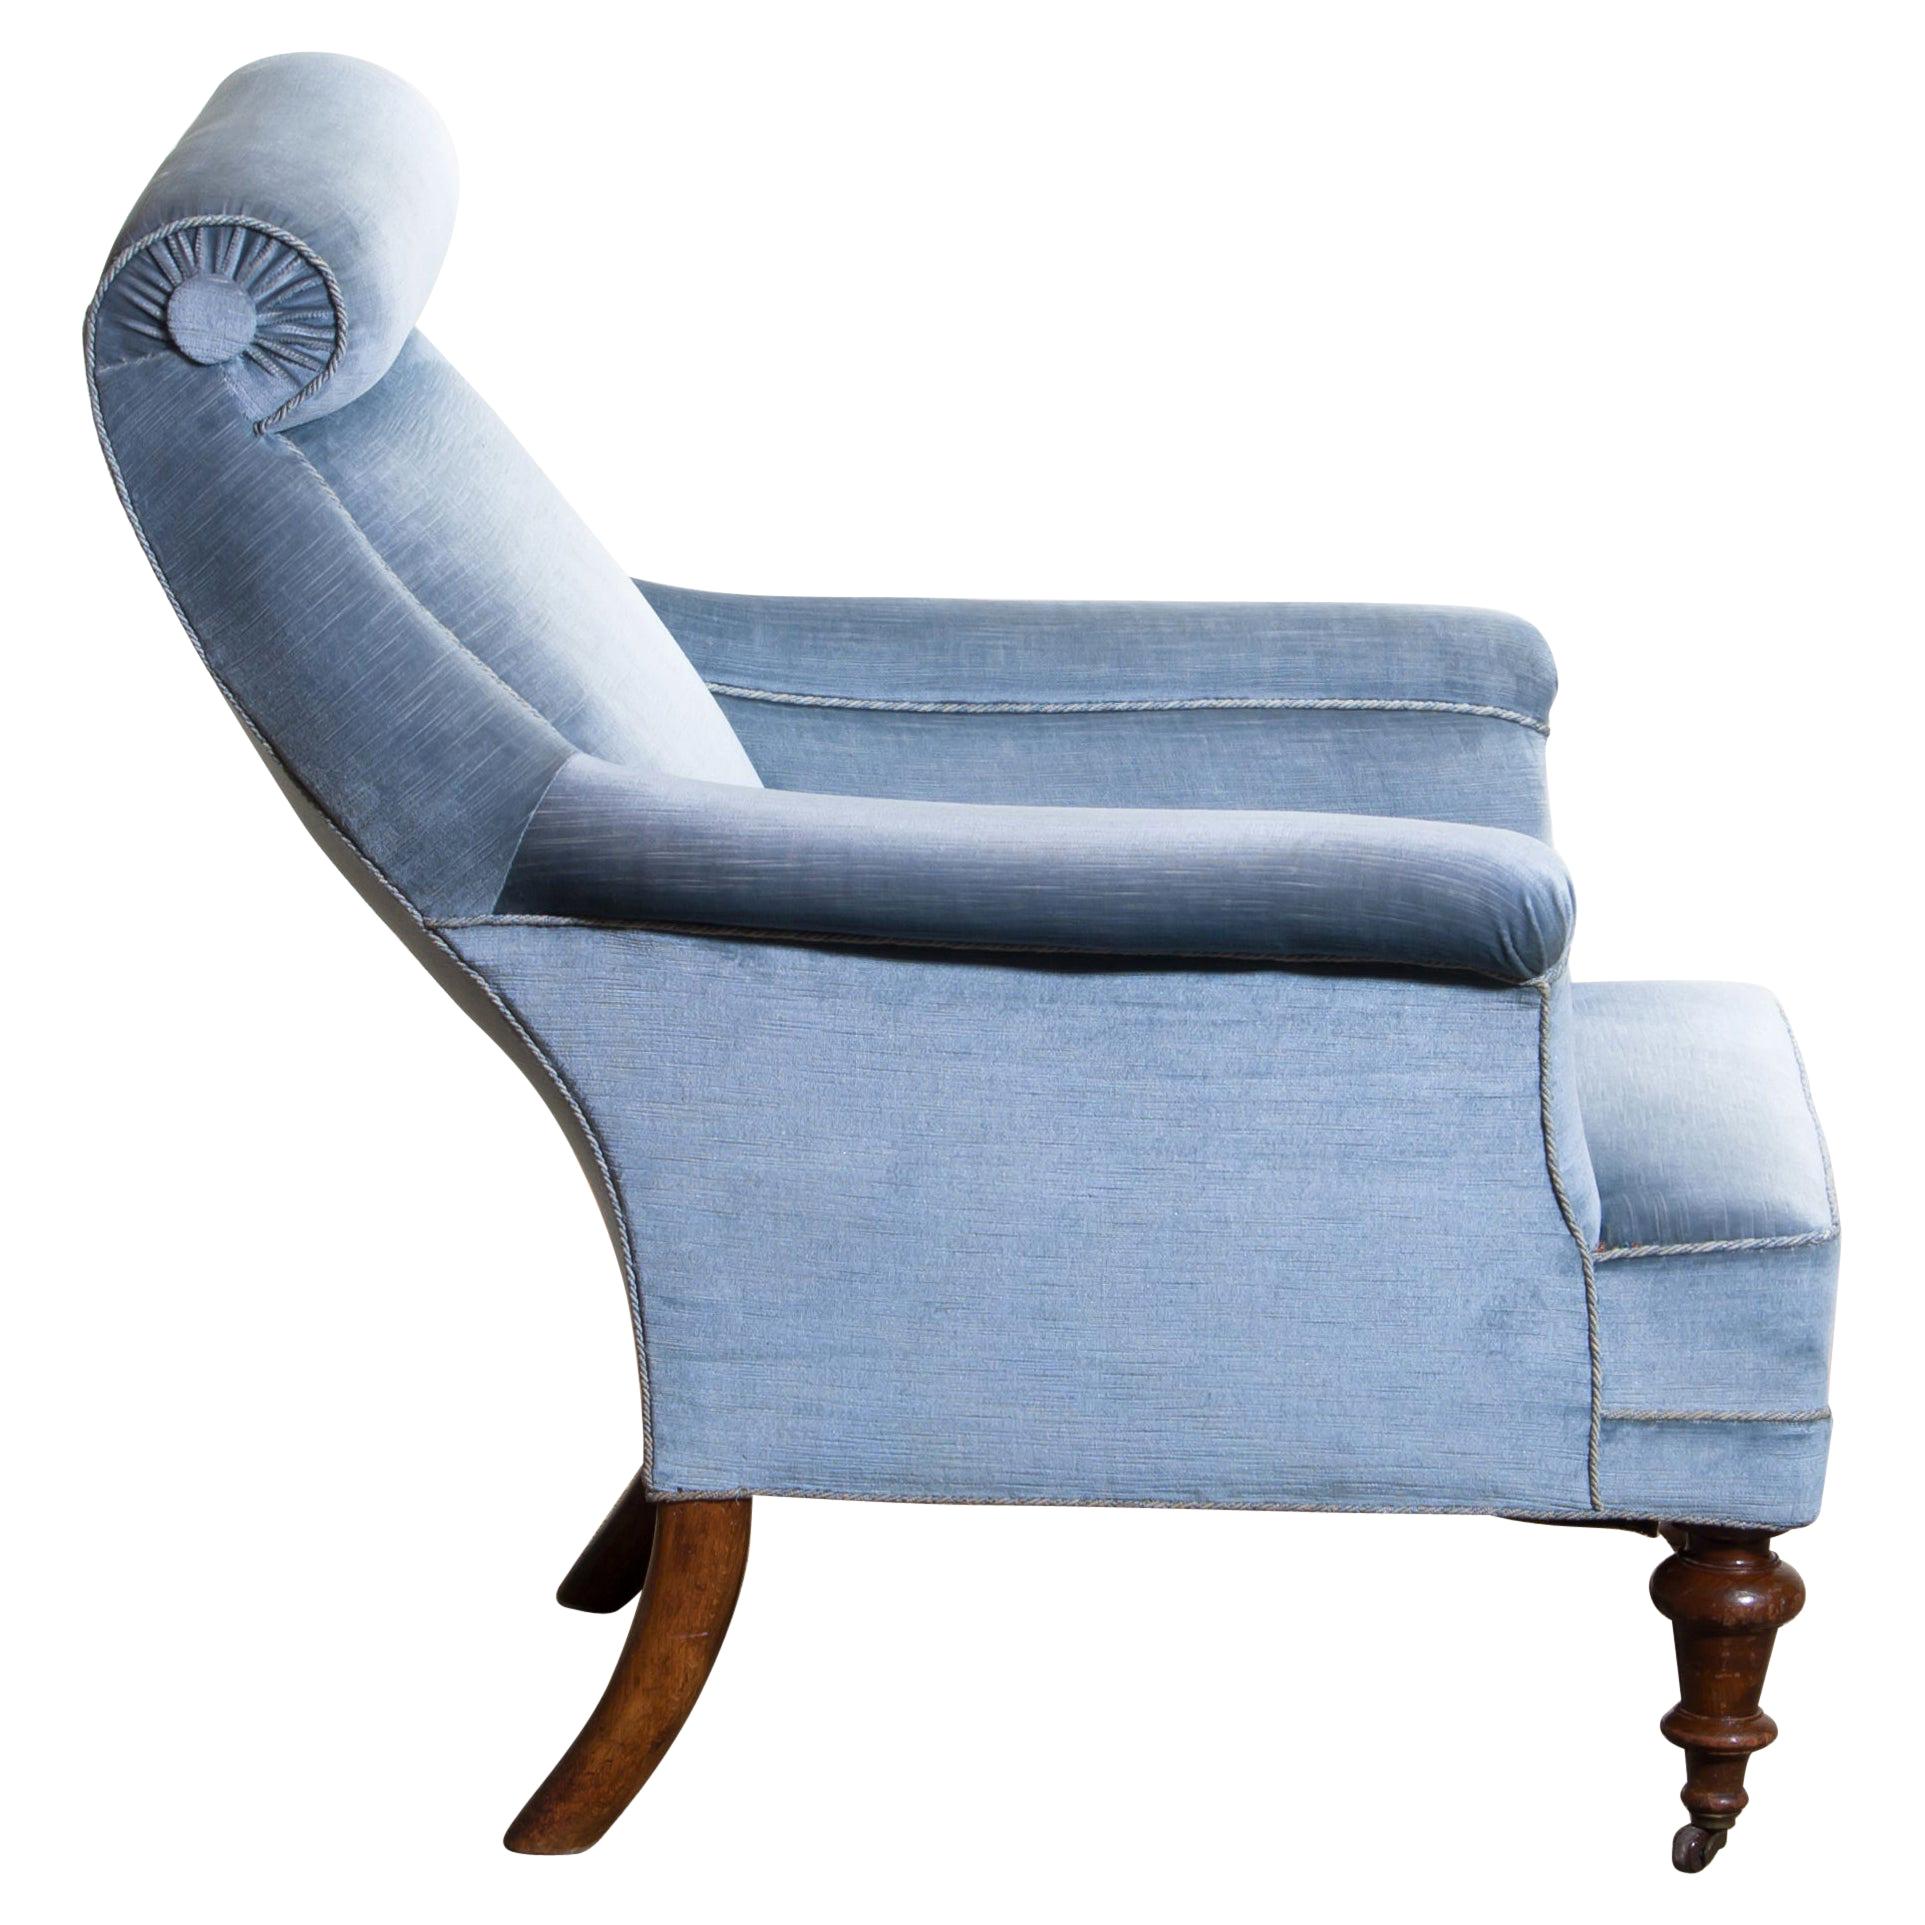 Rare and extremely comfortable / beautiful Bergère or lounge chair in Dorothy Draper style from the turn to the 20th century.
Upholstered in ice blue velvet and in good condition.

Period: 1900.